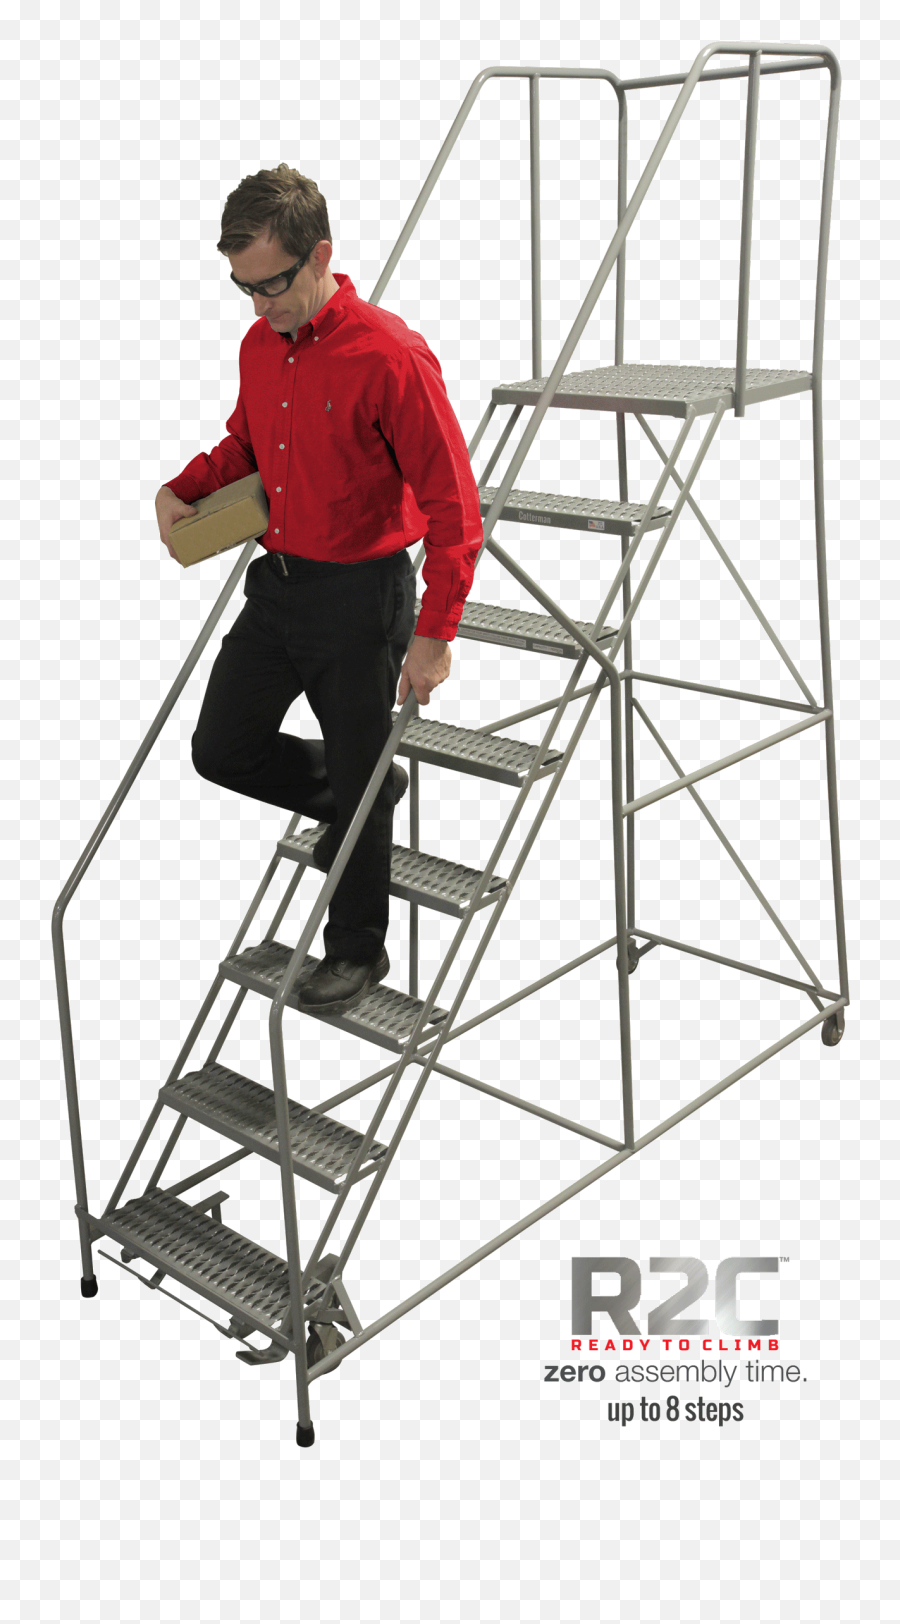 Download Easy 50 Climbing Angle Ladders - Ladder Png Image,Ladder Png